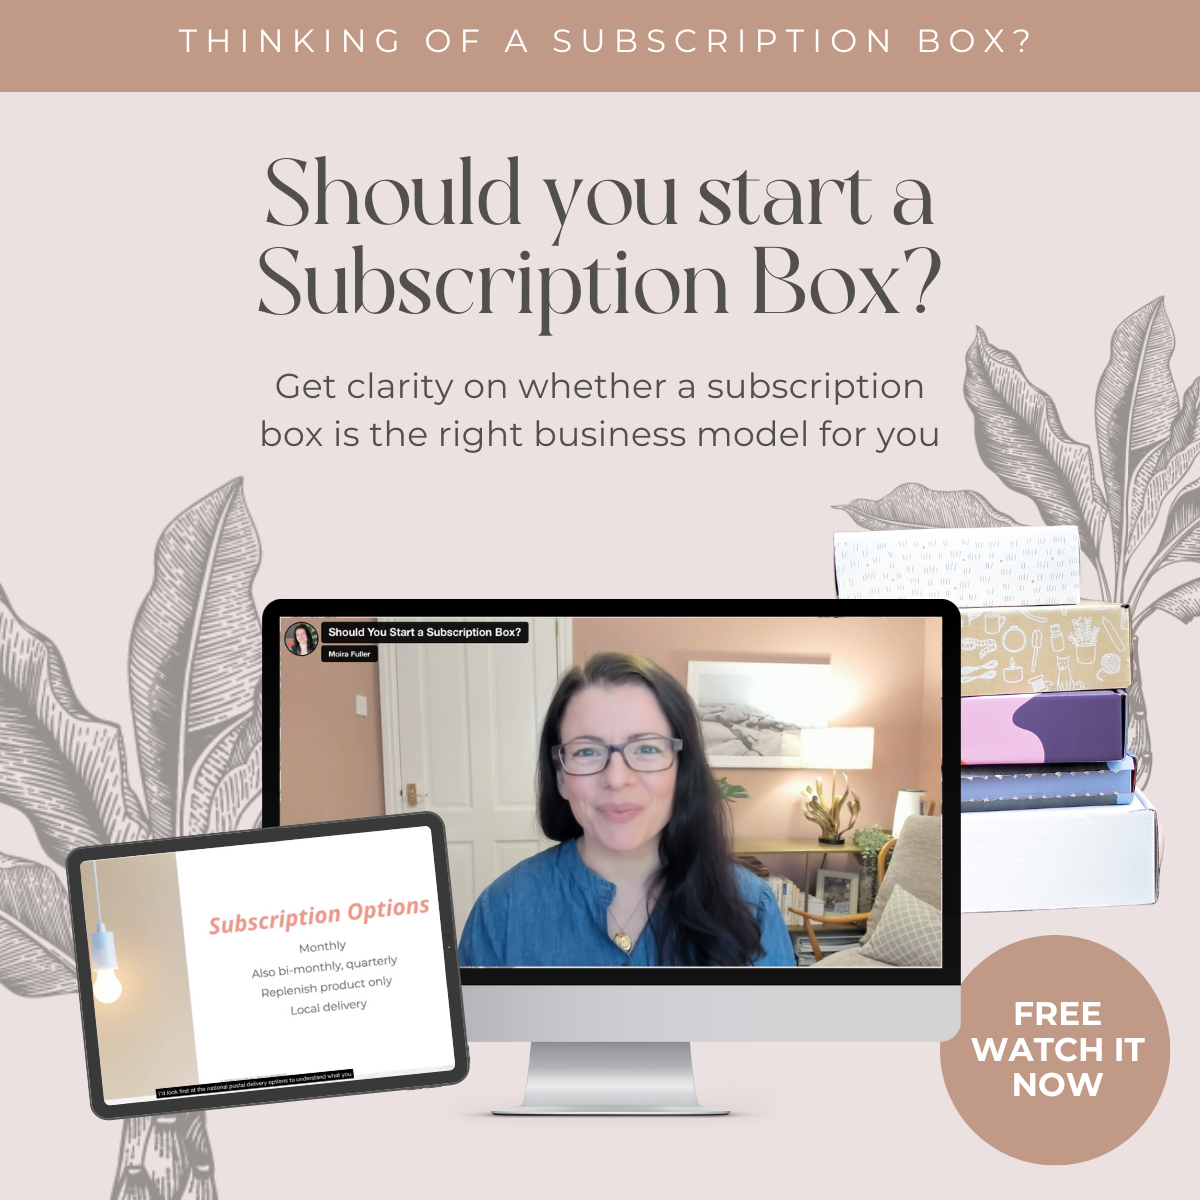 Should you start a subscription box square graphic showing screenshots from the video training.